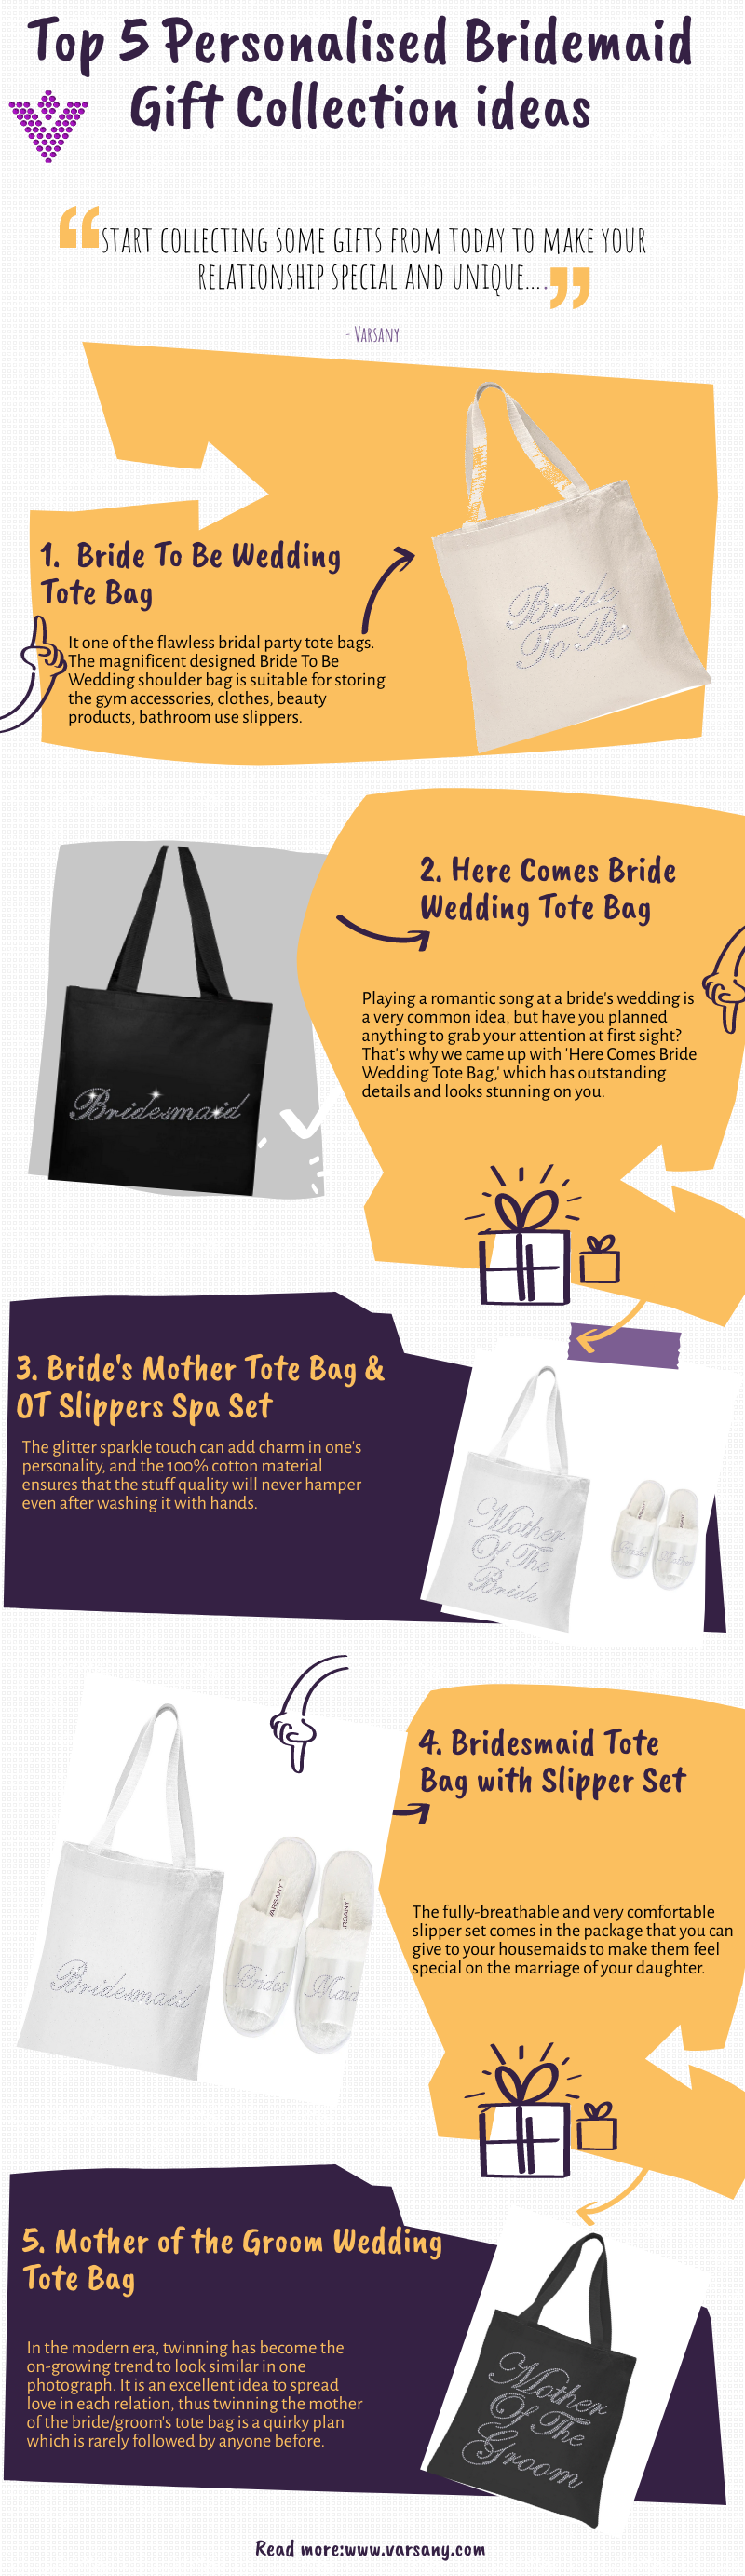 Best 5 Personalised Bridal Gifts Collection - JustPaste.it